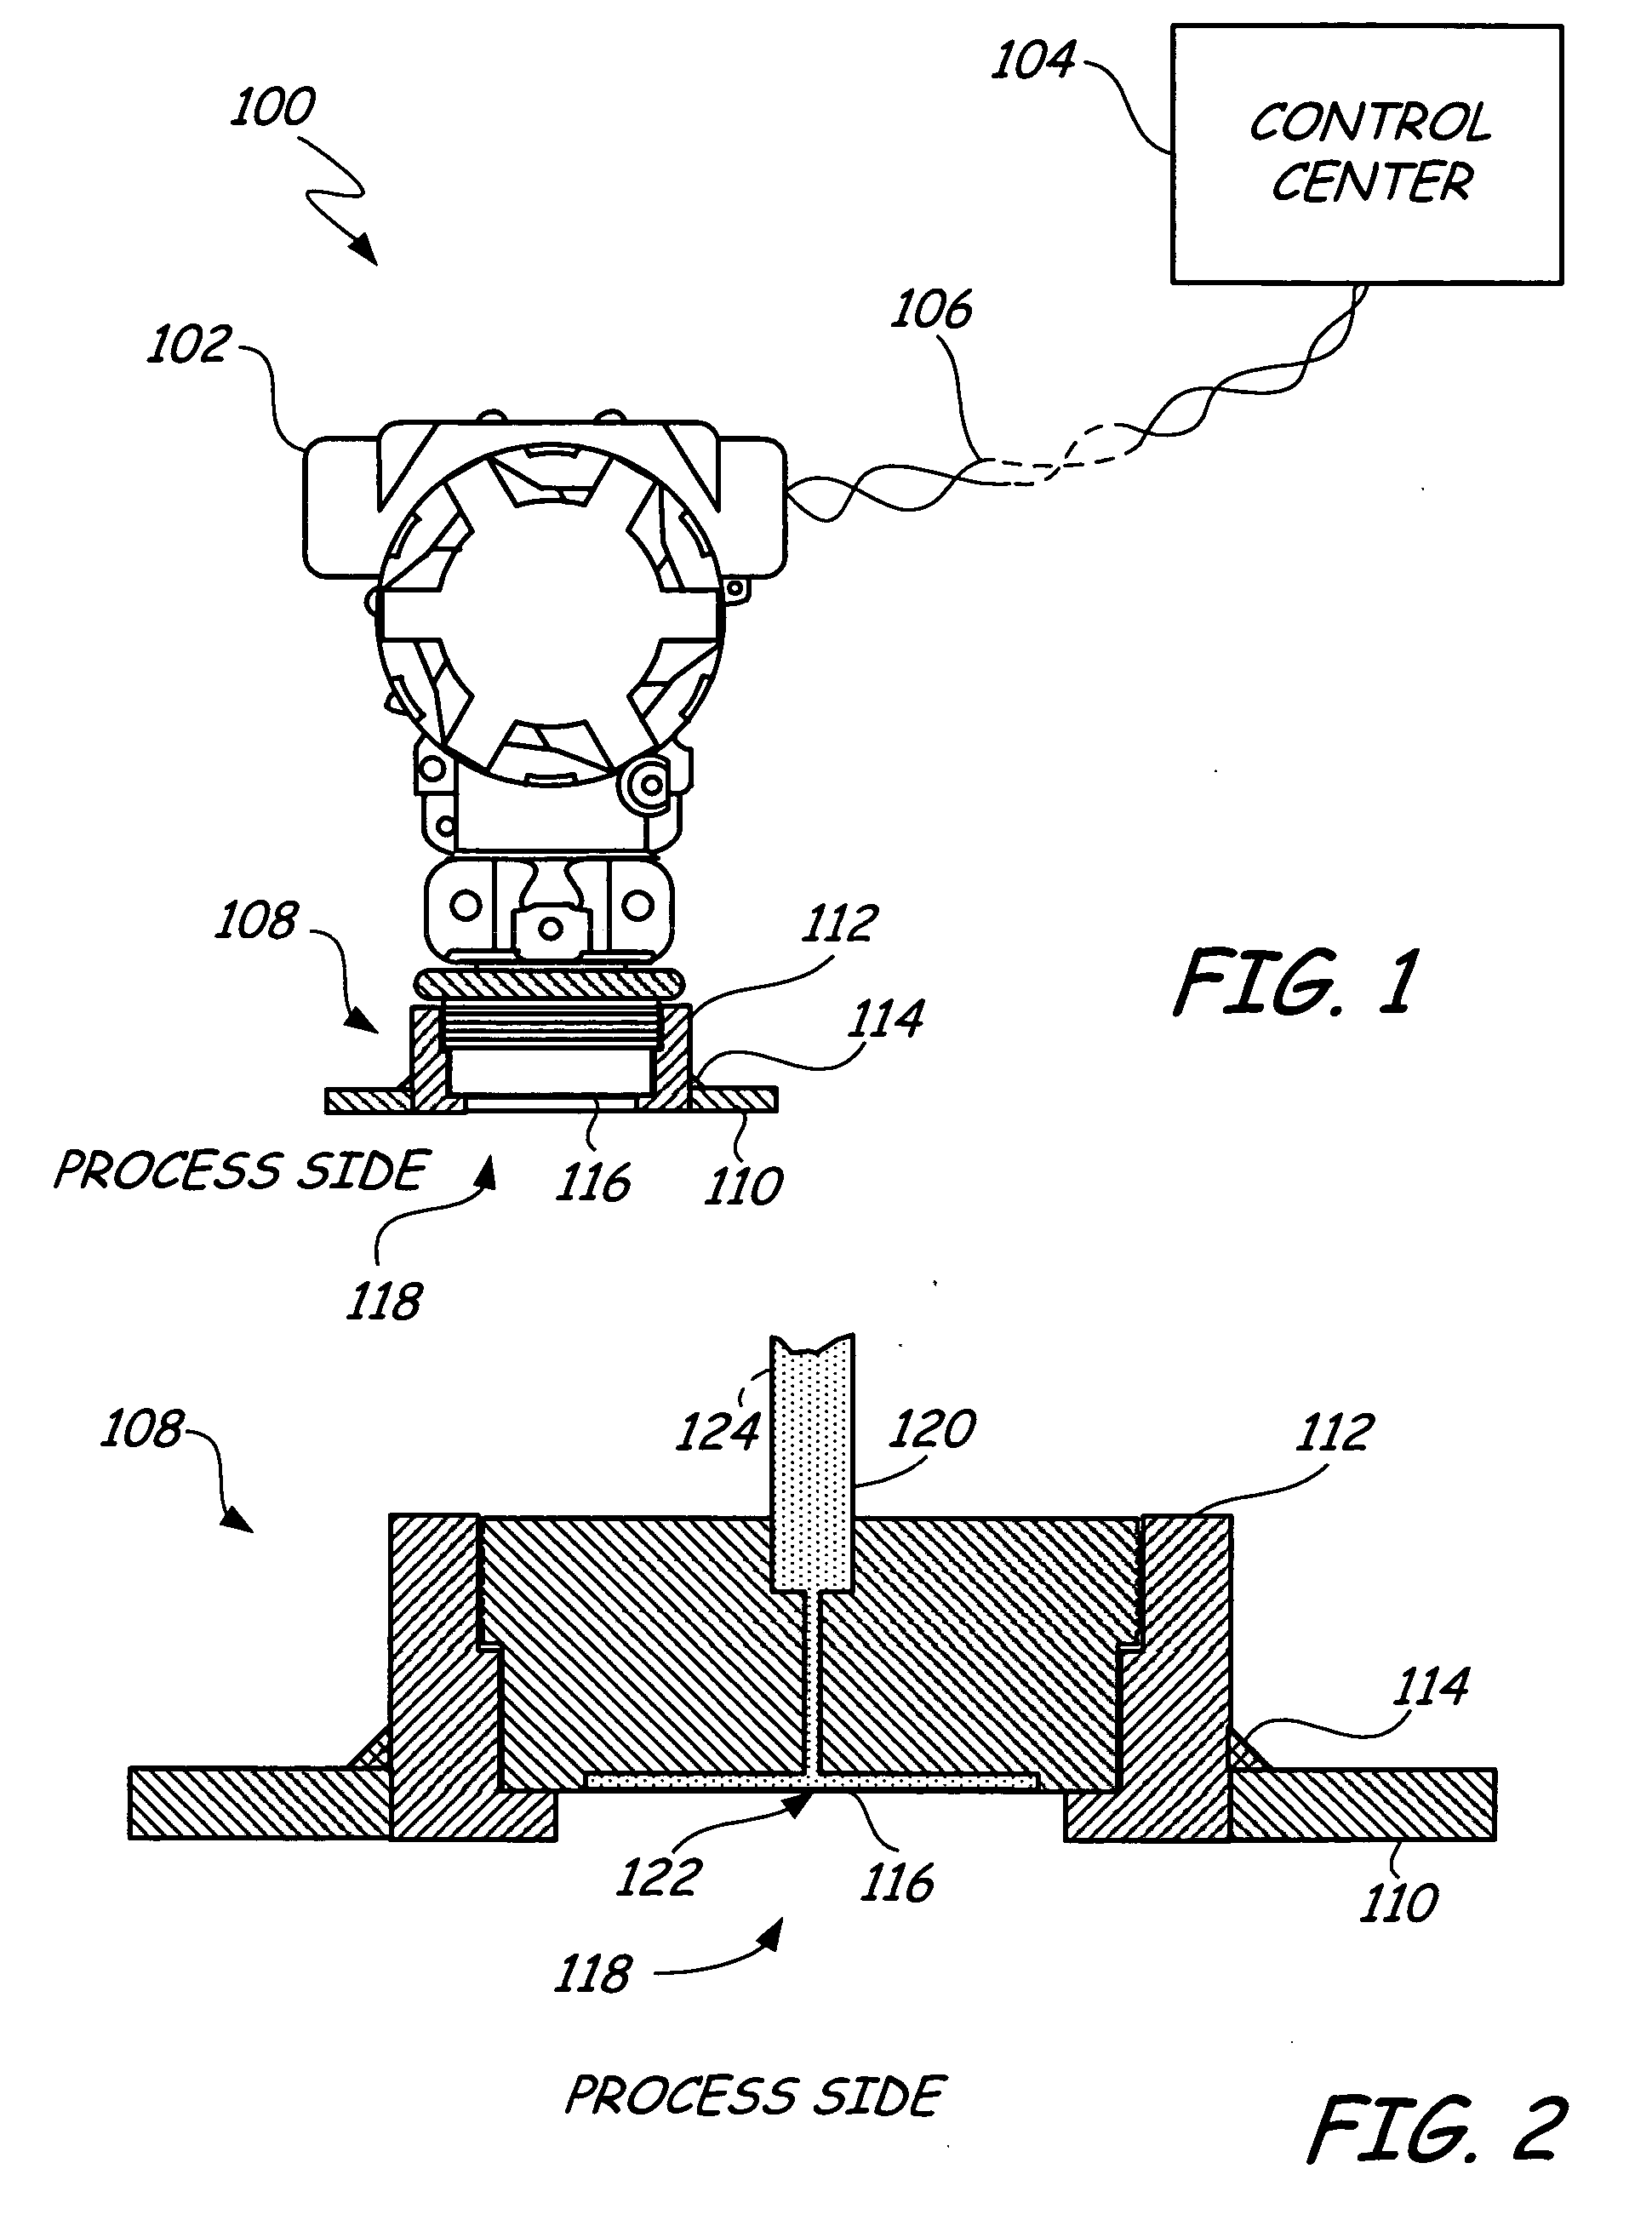 Diagnostic system for detecting rupture or thinning of diaphragms